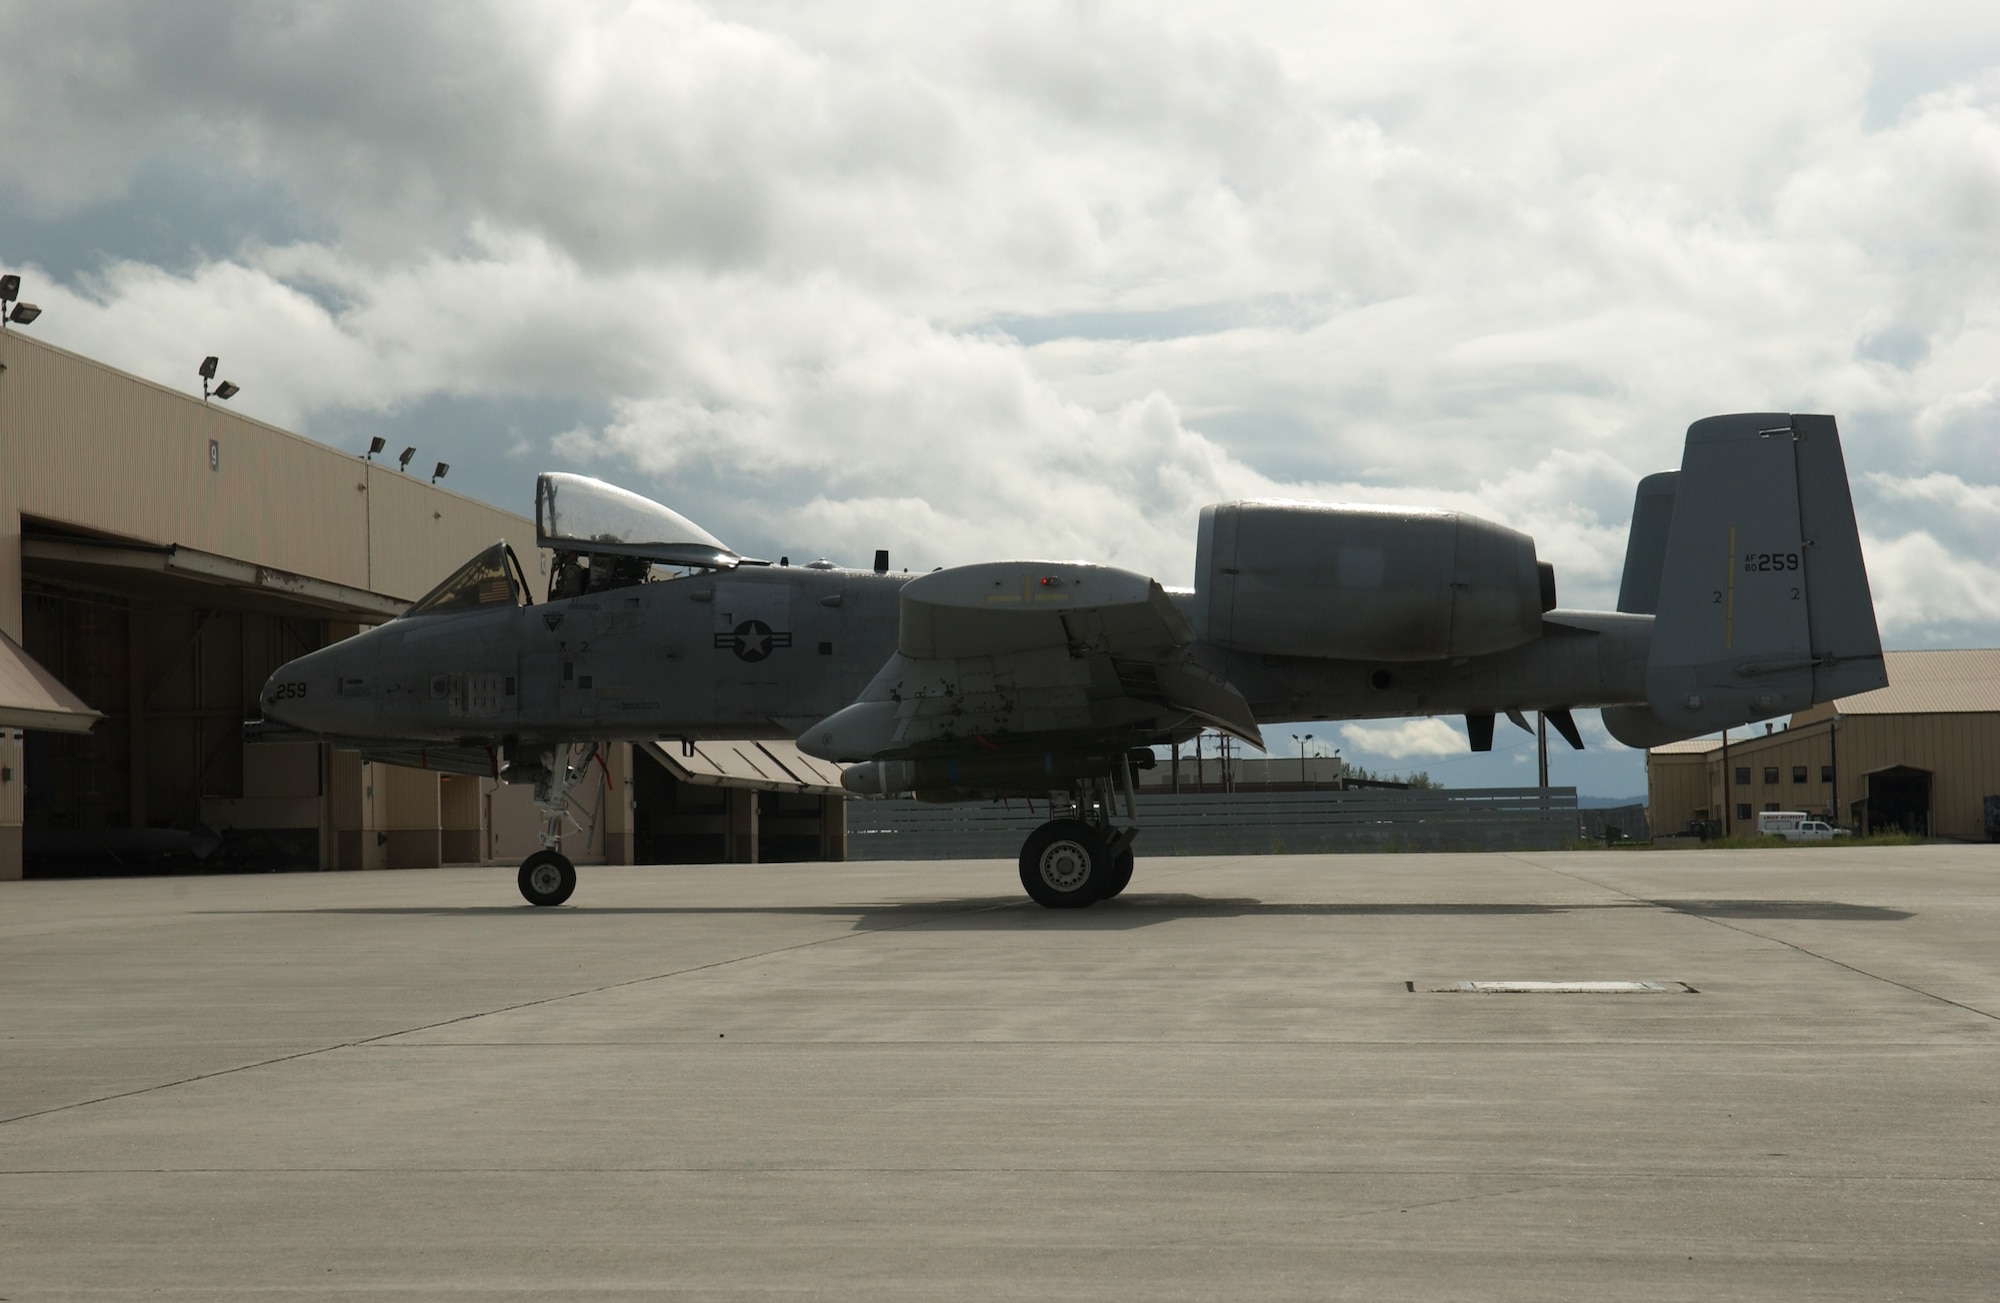 EIELSON AIR FORCE BASE, Alaska -- Lt. Col. Quentin Rideout, 355th Fighter Squadron Commander taxis his A-10 Thunderbolt back to the hawg pens on July 31. The first two A-10's arrived at Eielson on December 18, 1981, while the last two A-10's are set to leave on August 15, 2007 to Moody AFB, Ga., and Mountain Home AFB, Idaho (U.S. Air Force Photo by Airman 1st Class Jonathan Snyder)